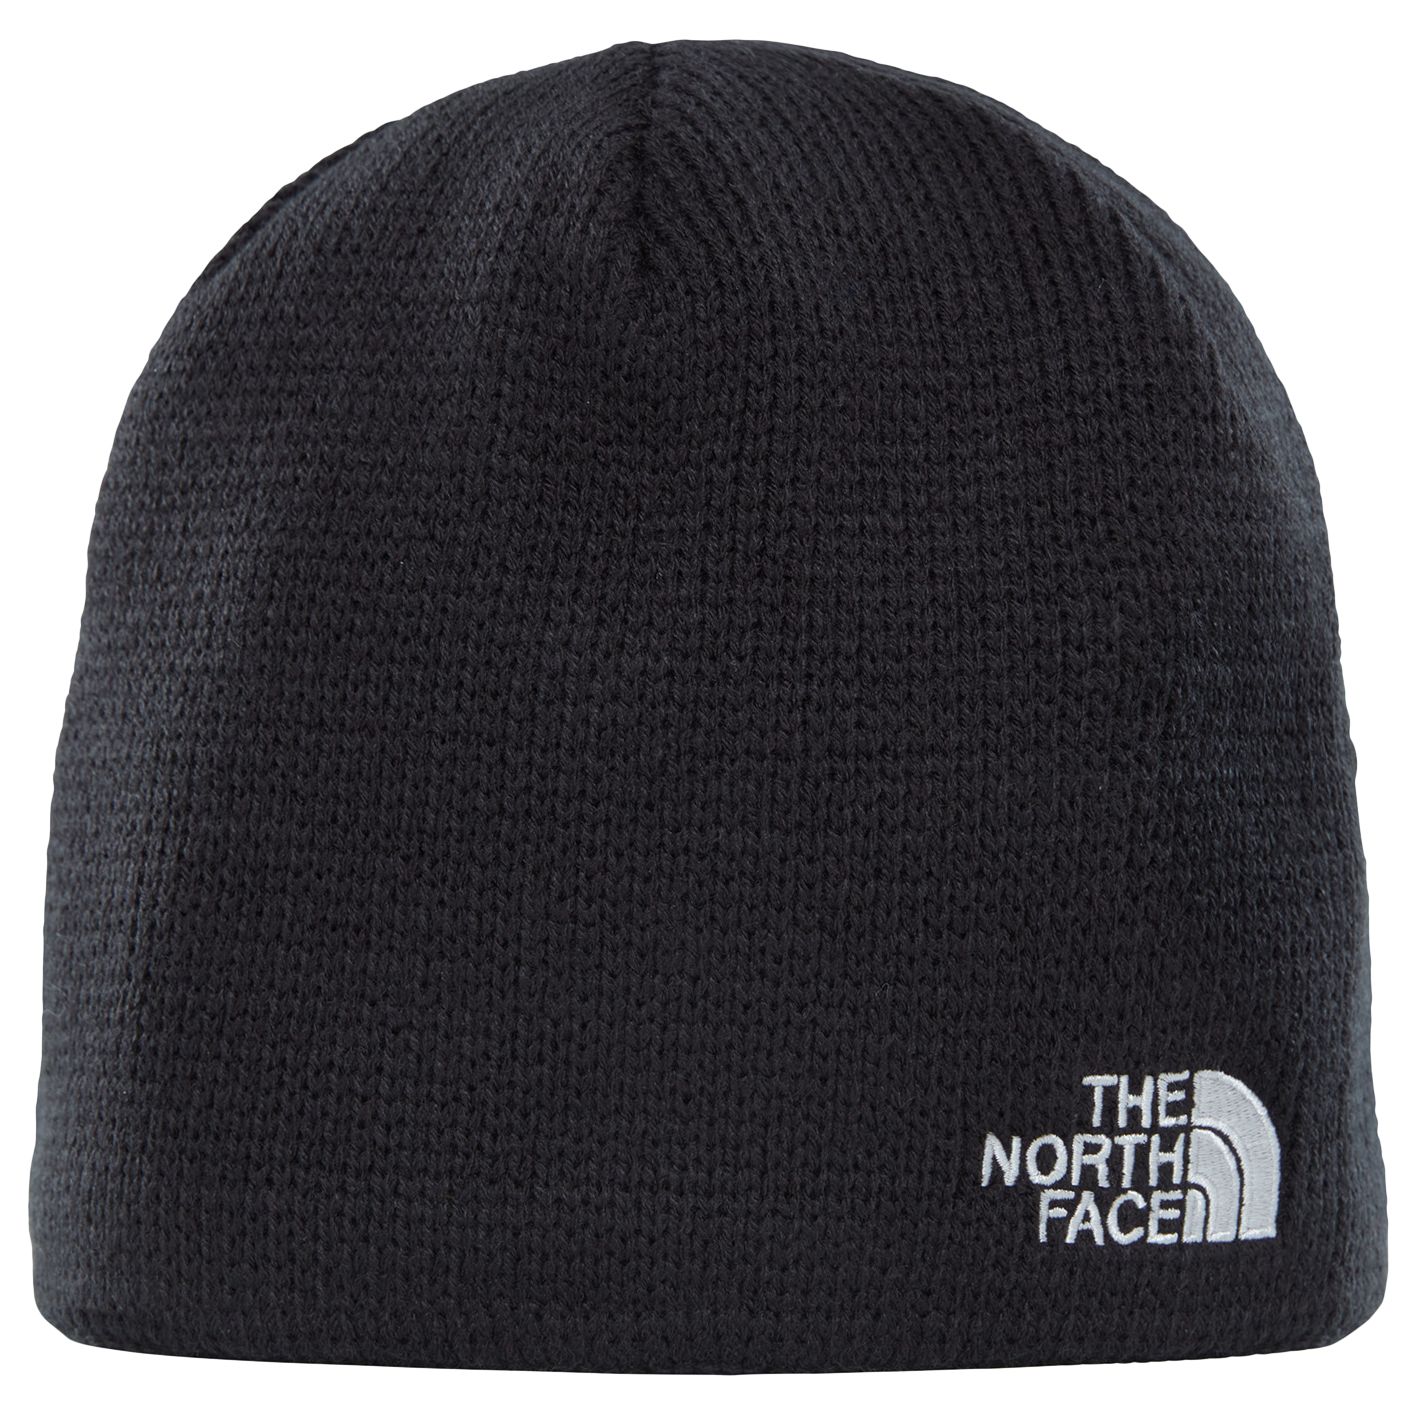 The North Face Bones Beanie, One Size, Black